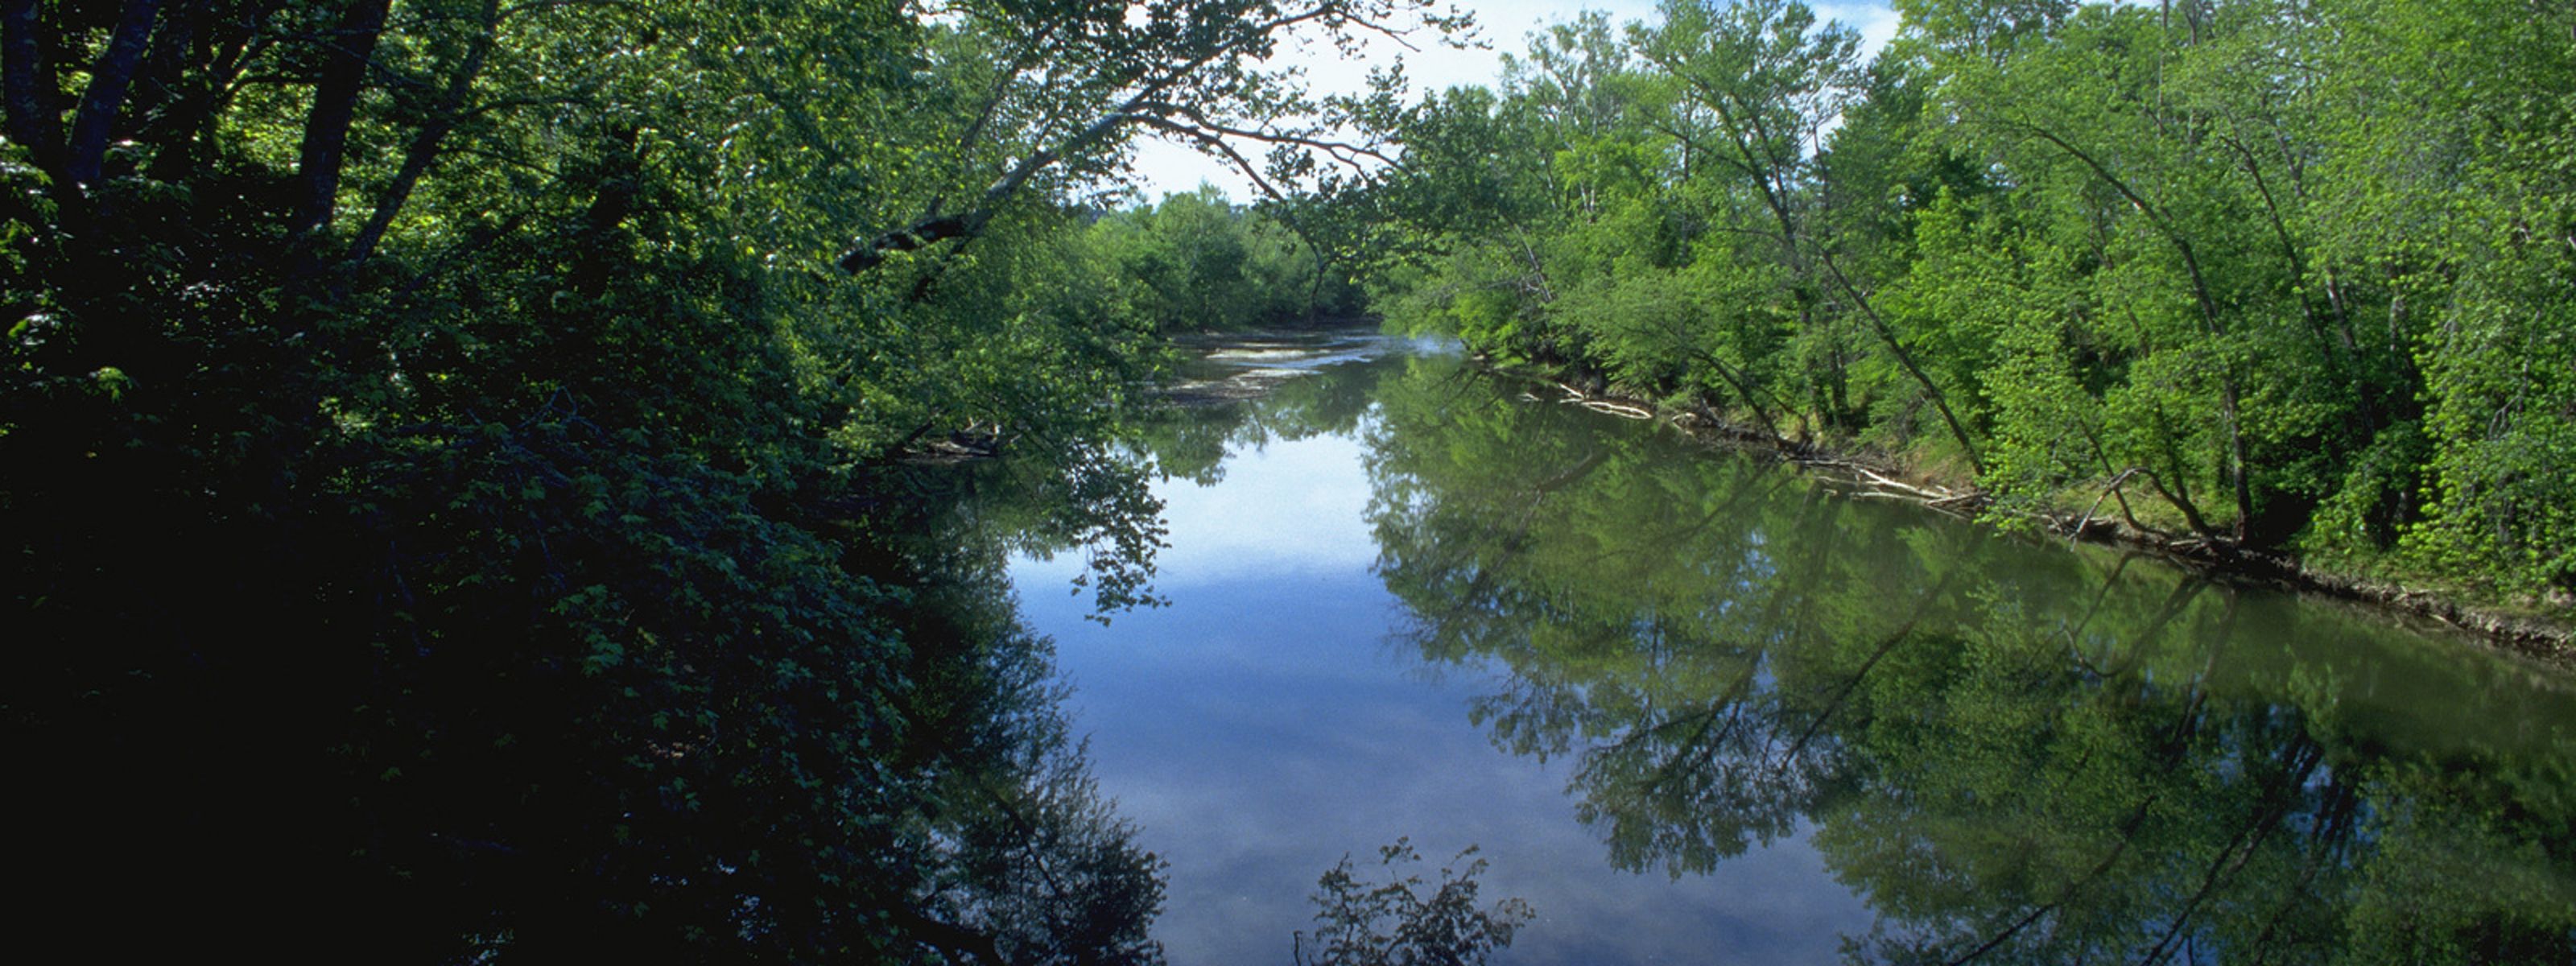 The Green River in Kentucky flowing with trees lining the shores.